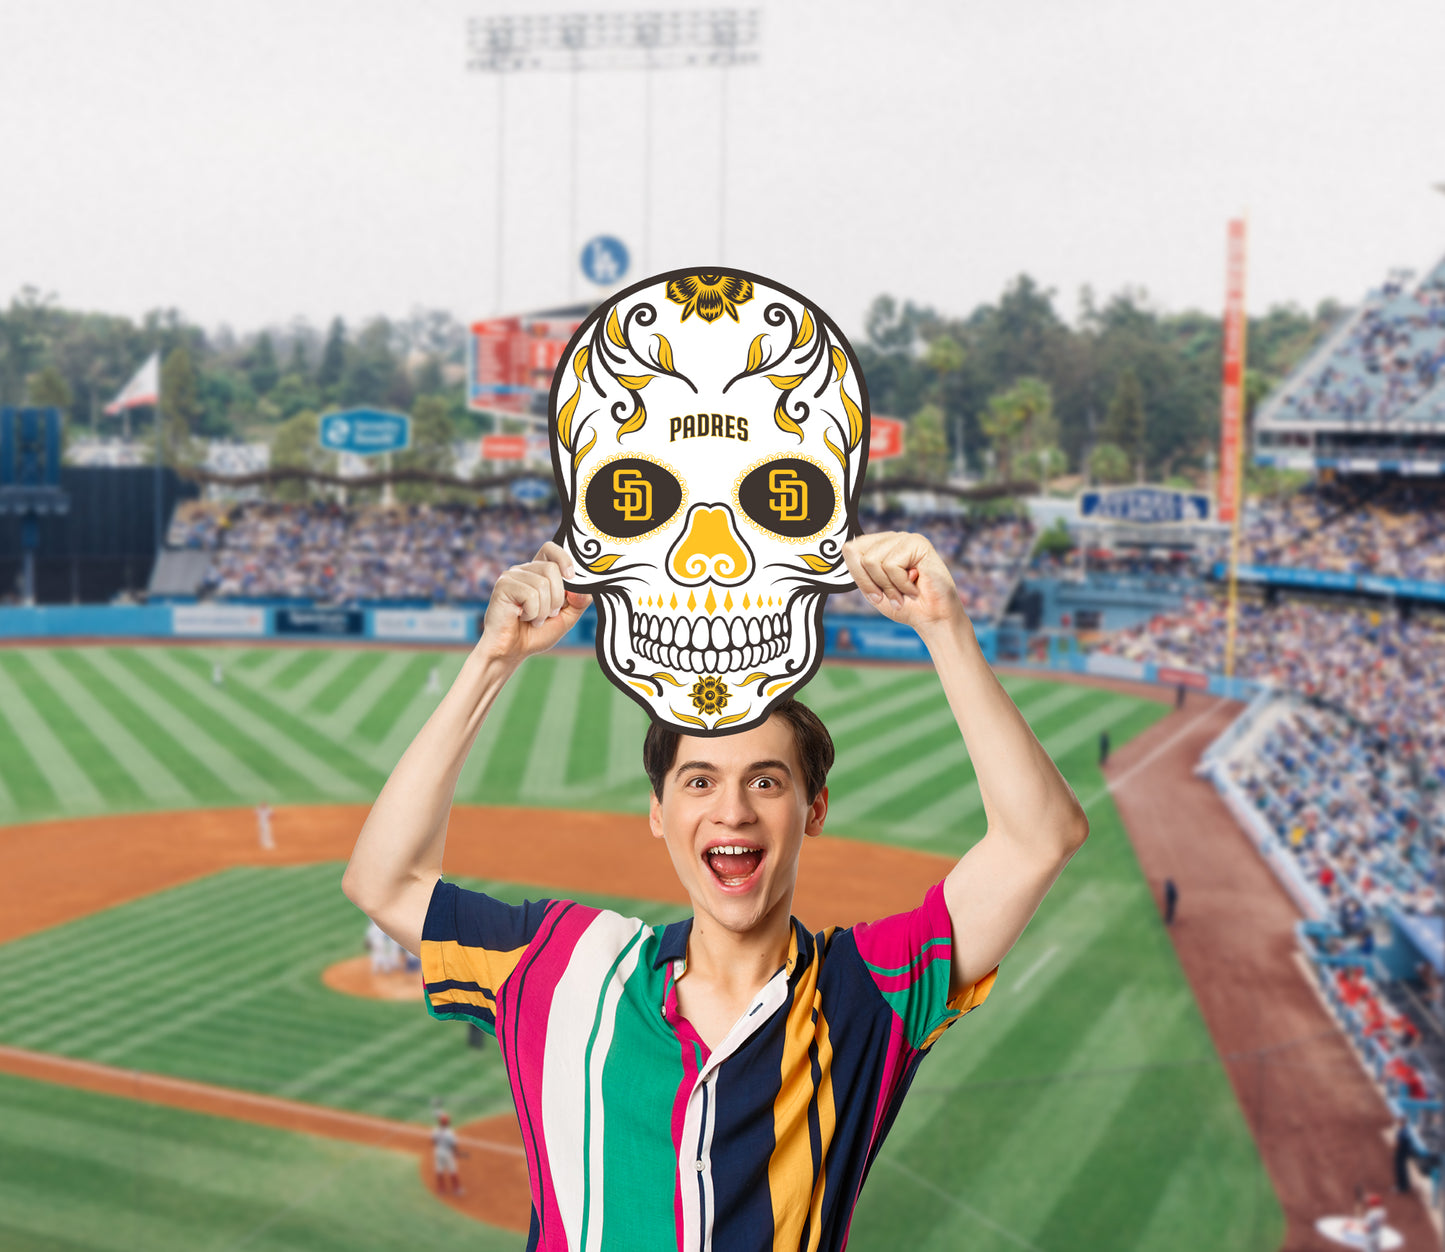 San Diego Padres: 2022 Skull Foam Core Cutout - Officially